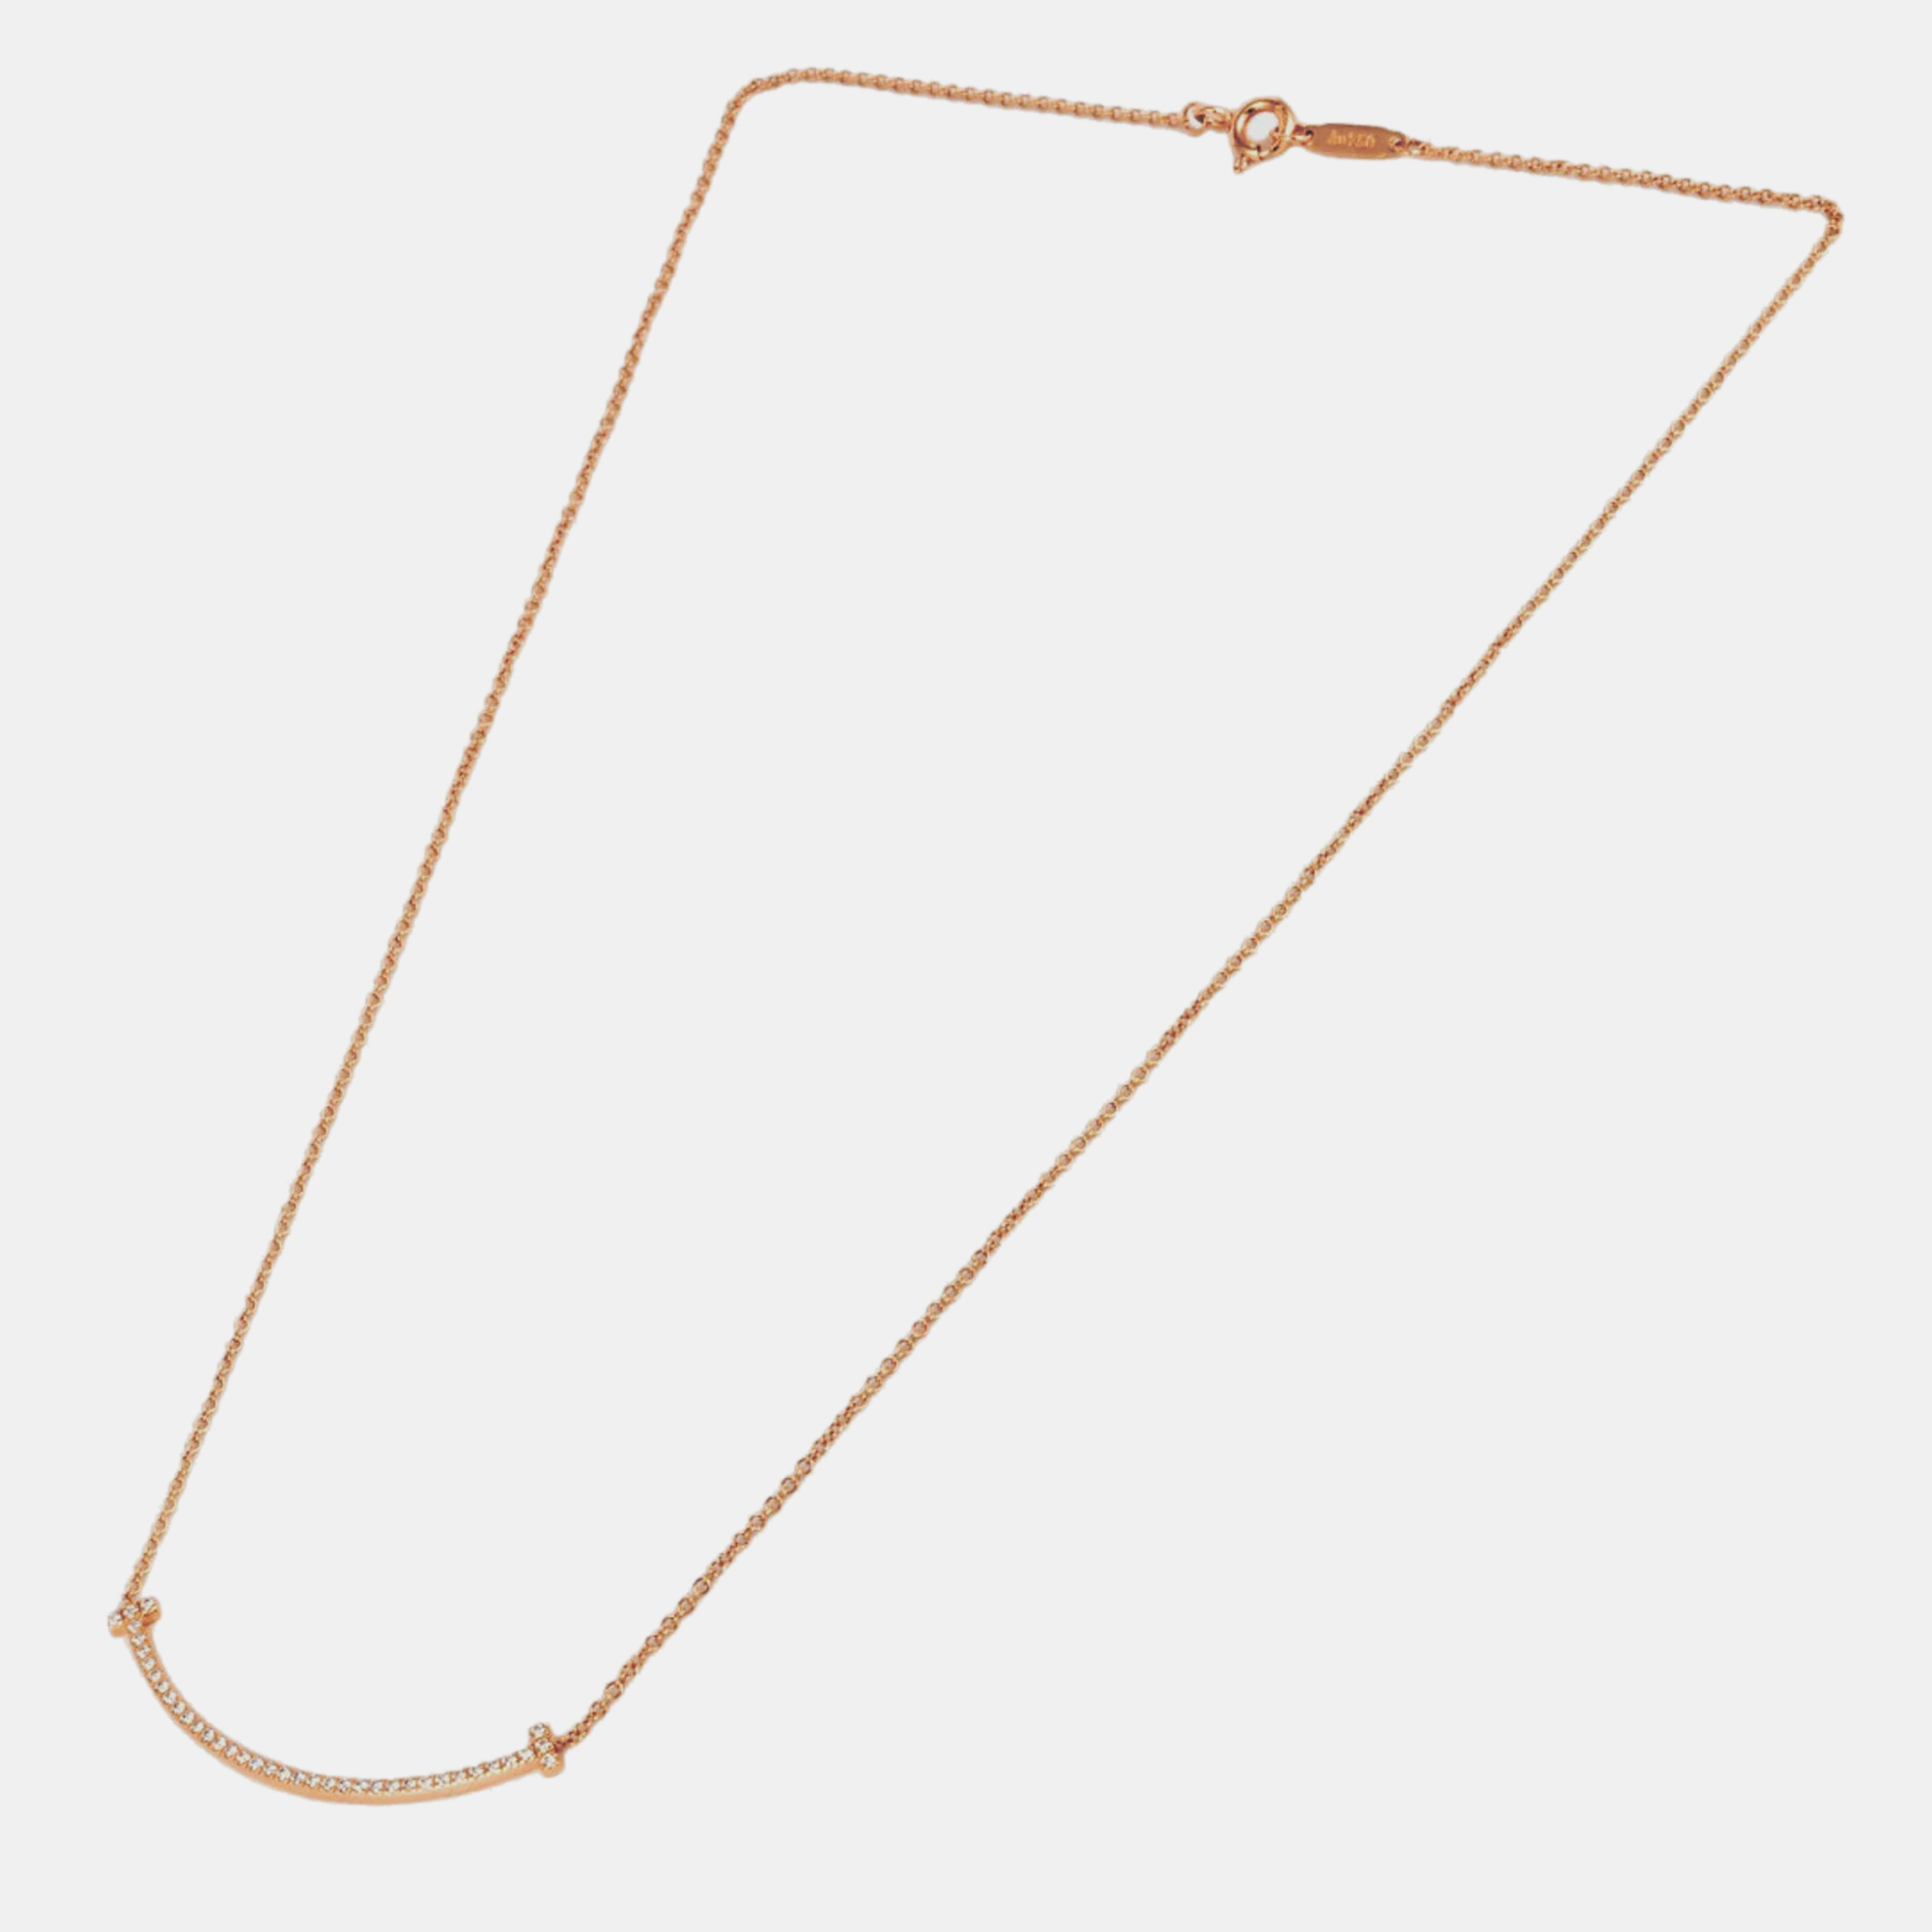 Tiffany & Co. T Smile Small 18K Rose Gold Diamond Necklace